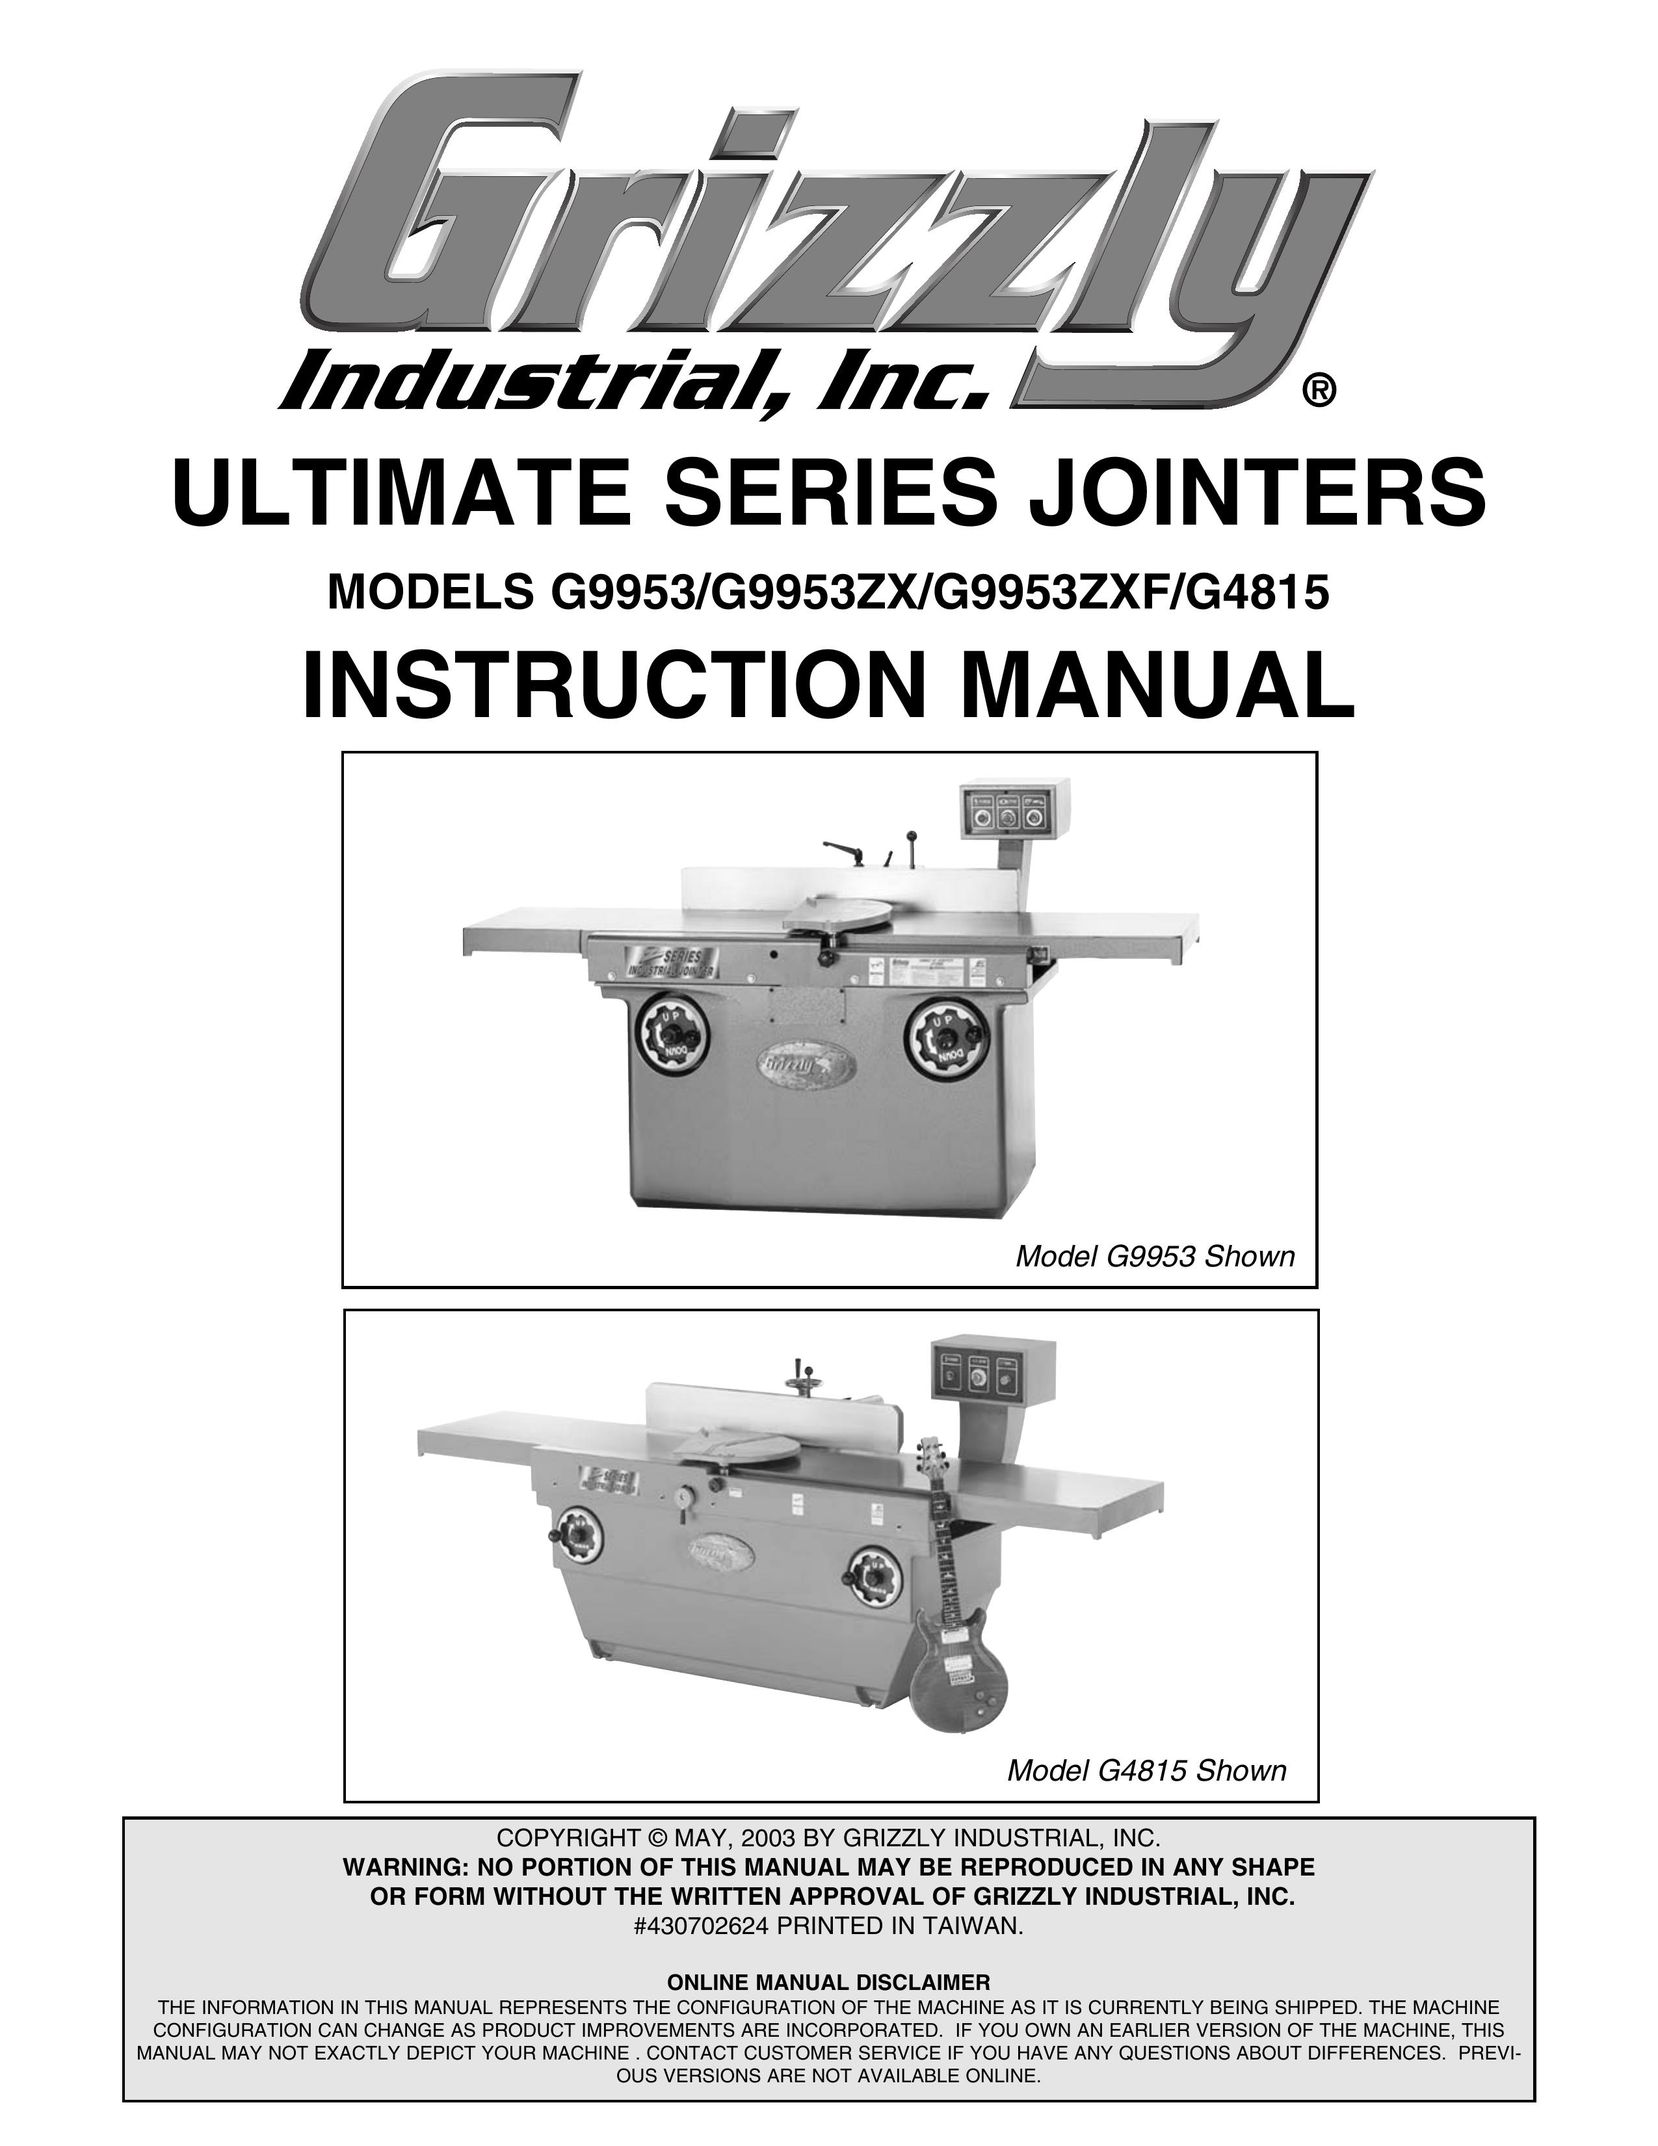 Grizzly G4815 Biscuit Joiner User Manual (Page 1)